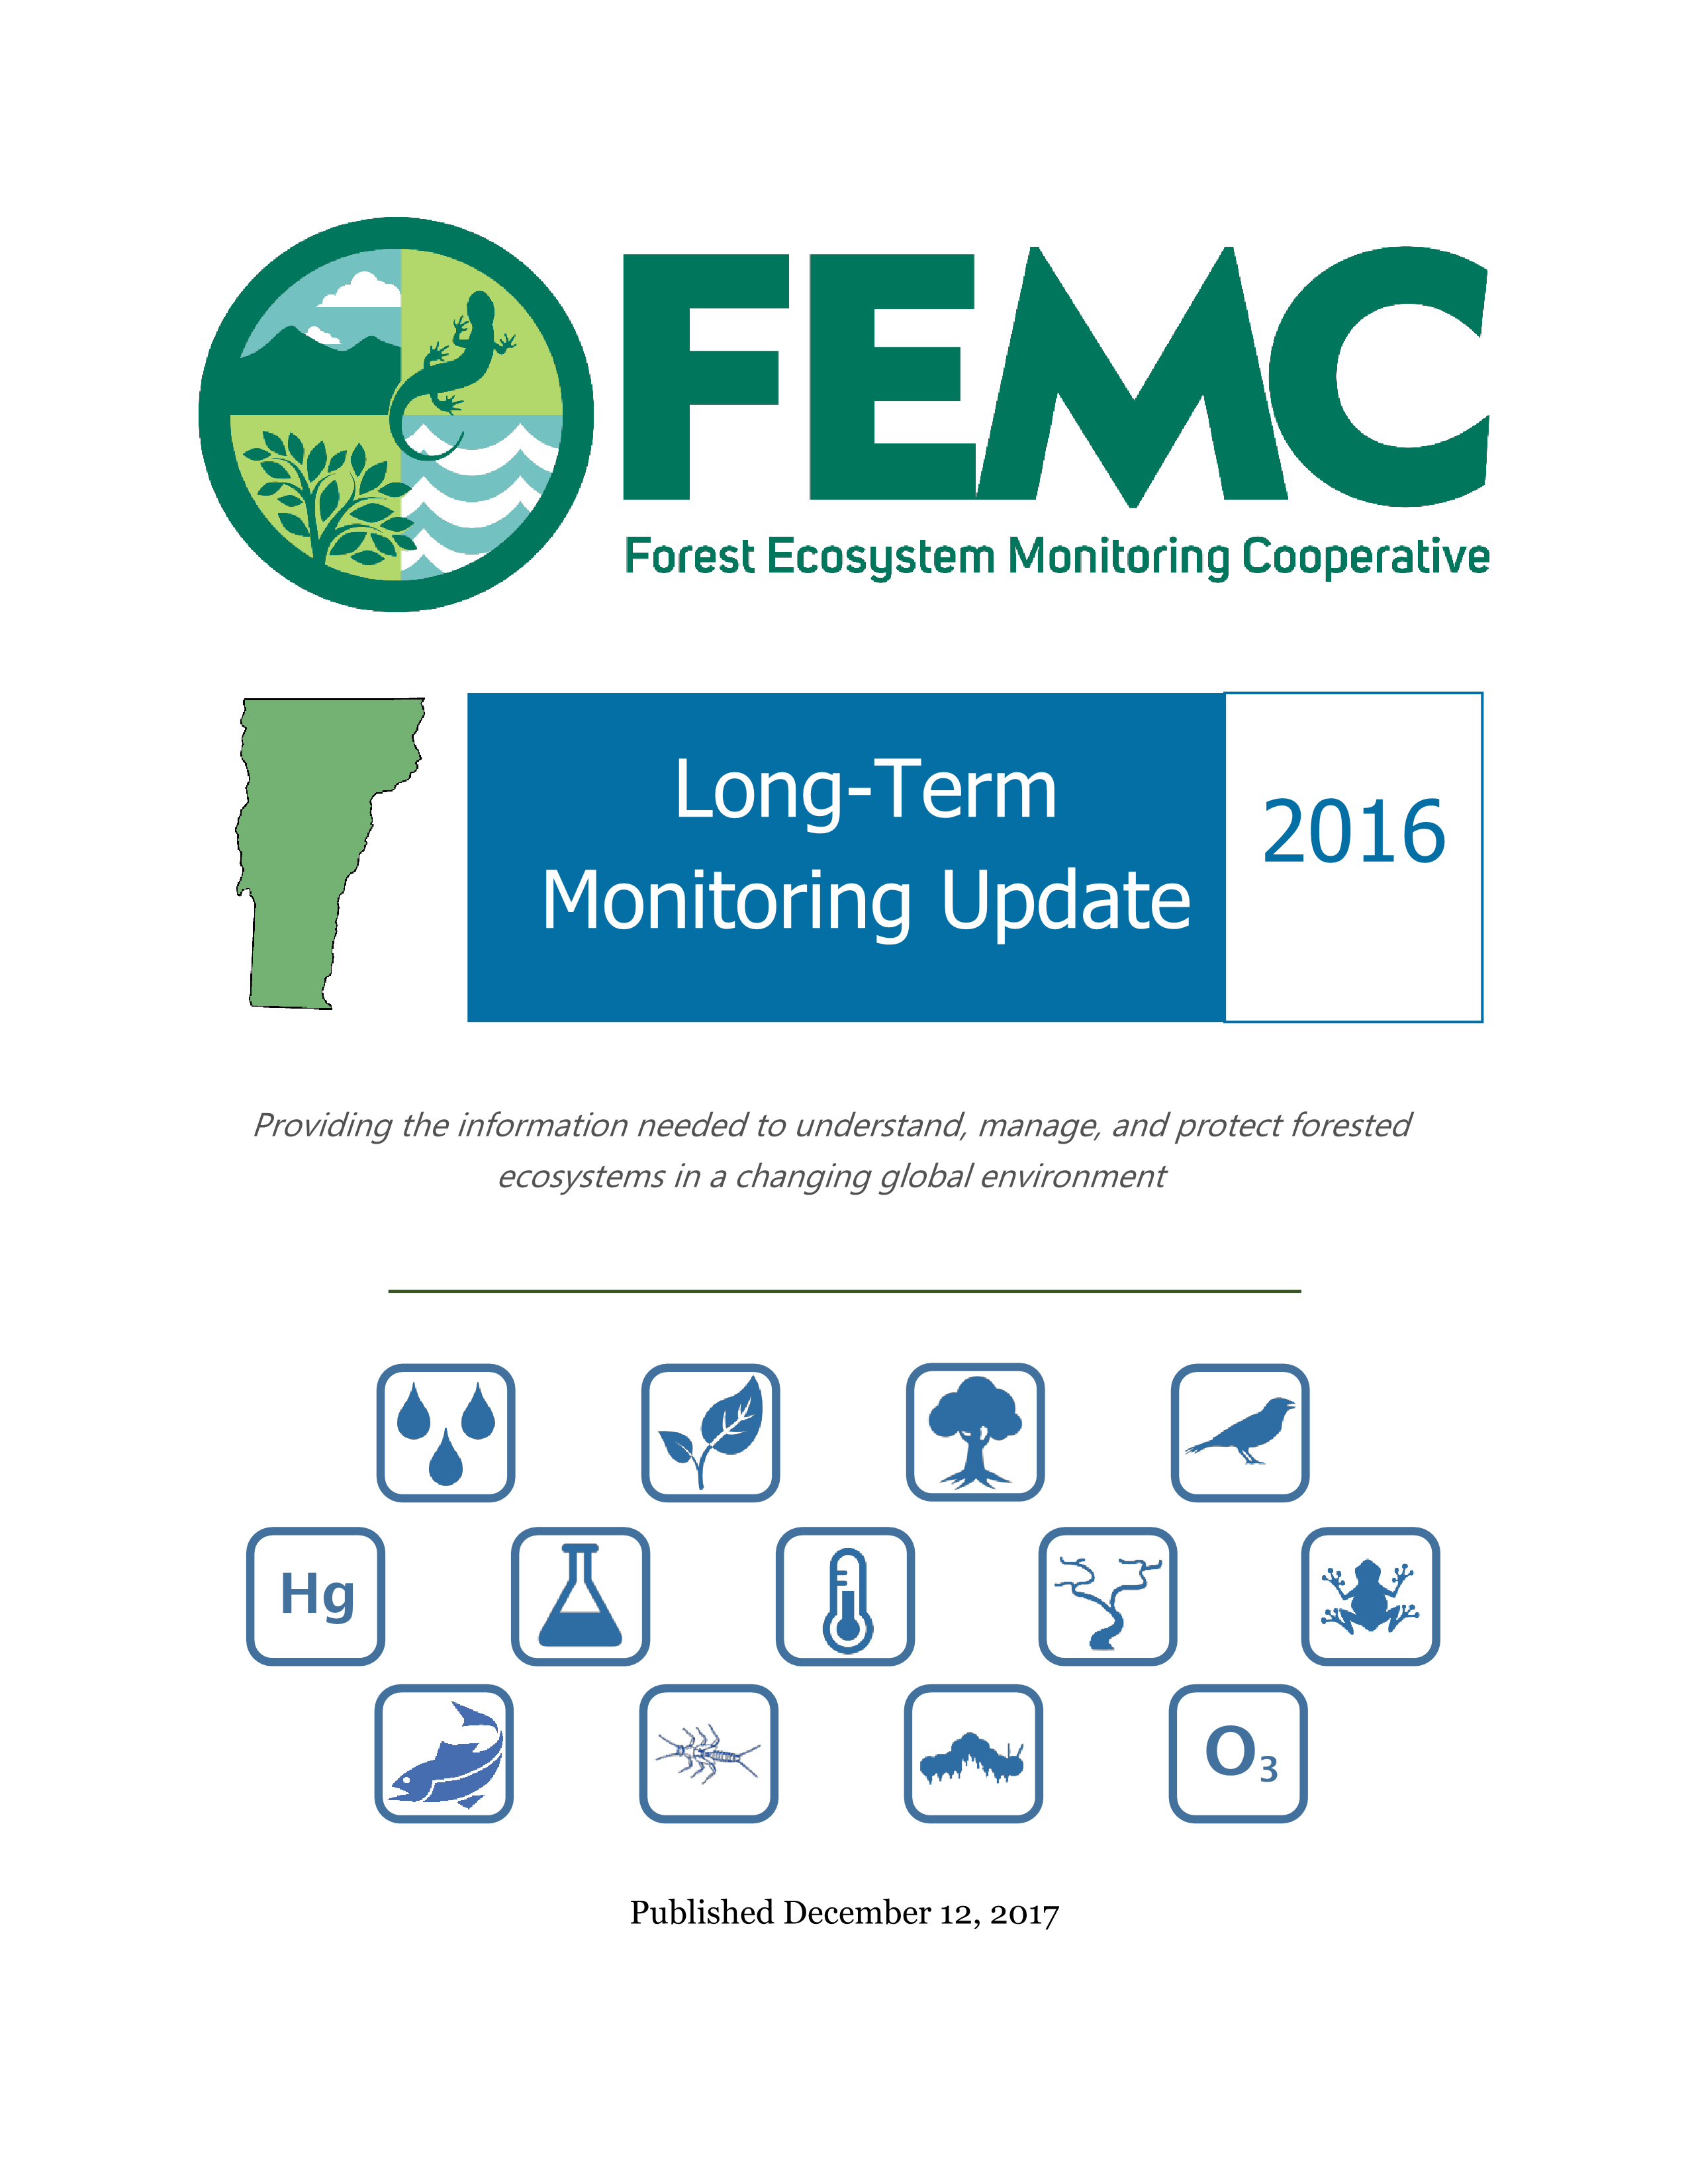 Cover page of the 2016 FEMC Long-Term Monitoring Update